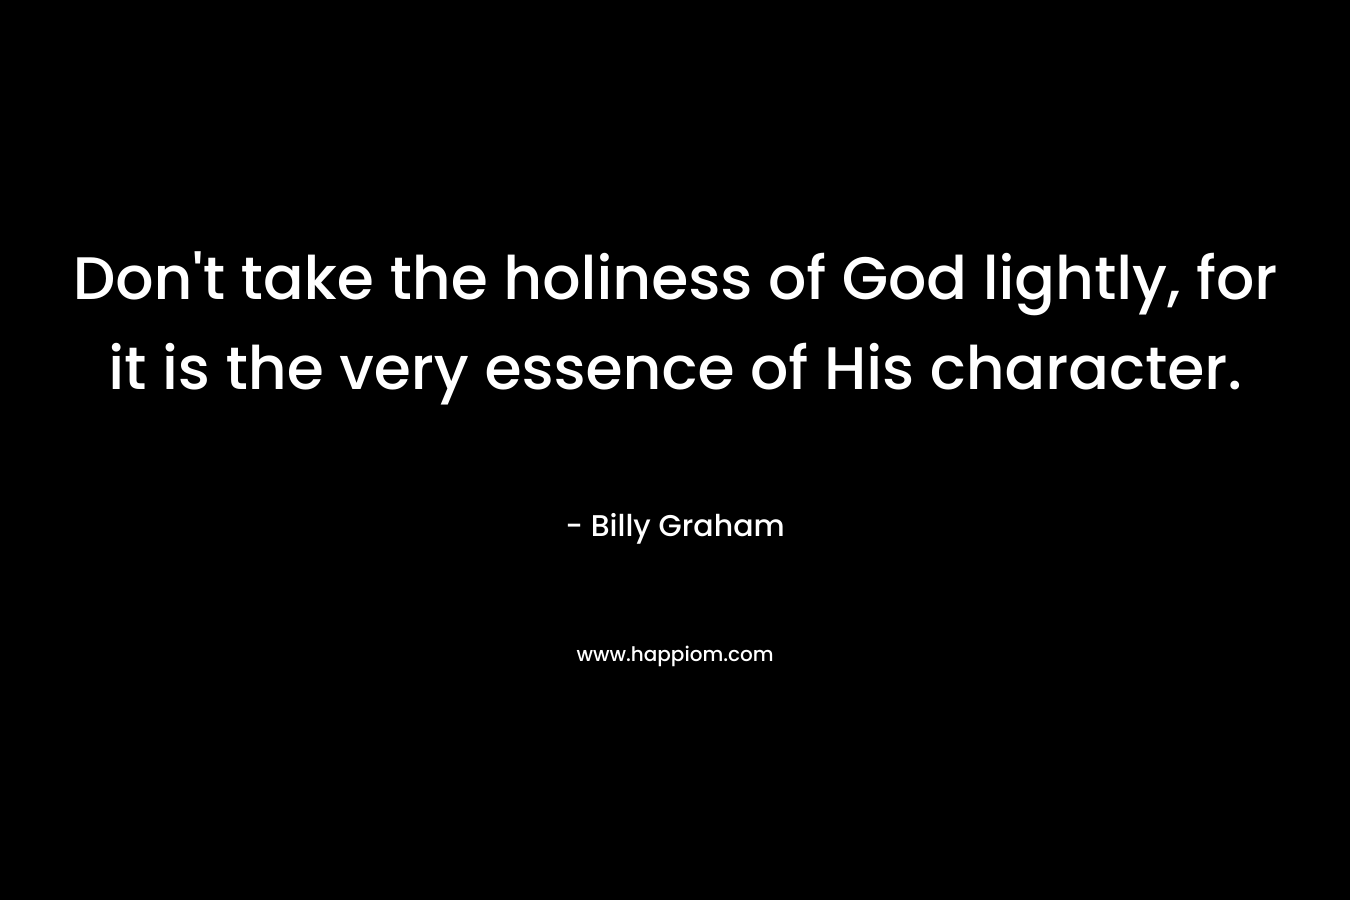 Don't take the holiness of God lightly, for it is the very essence of His character.